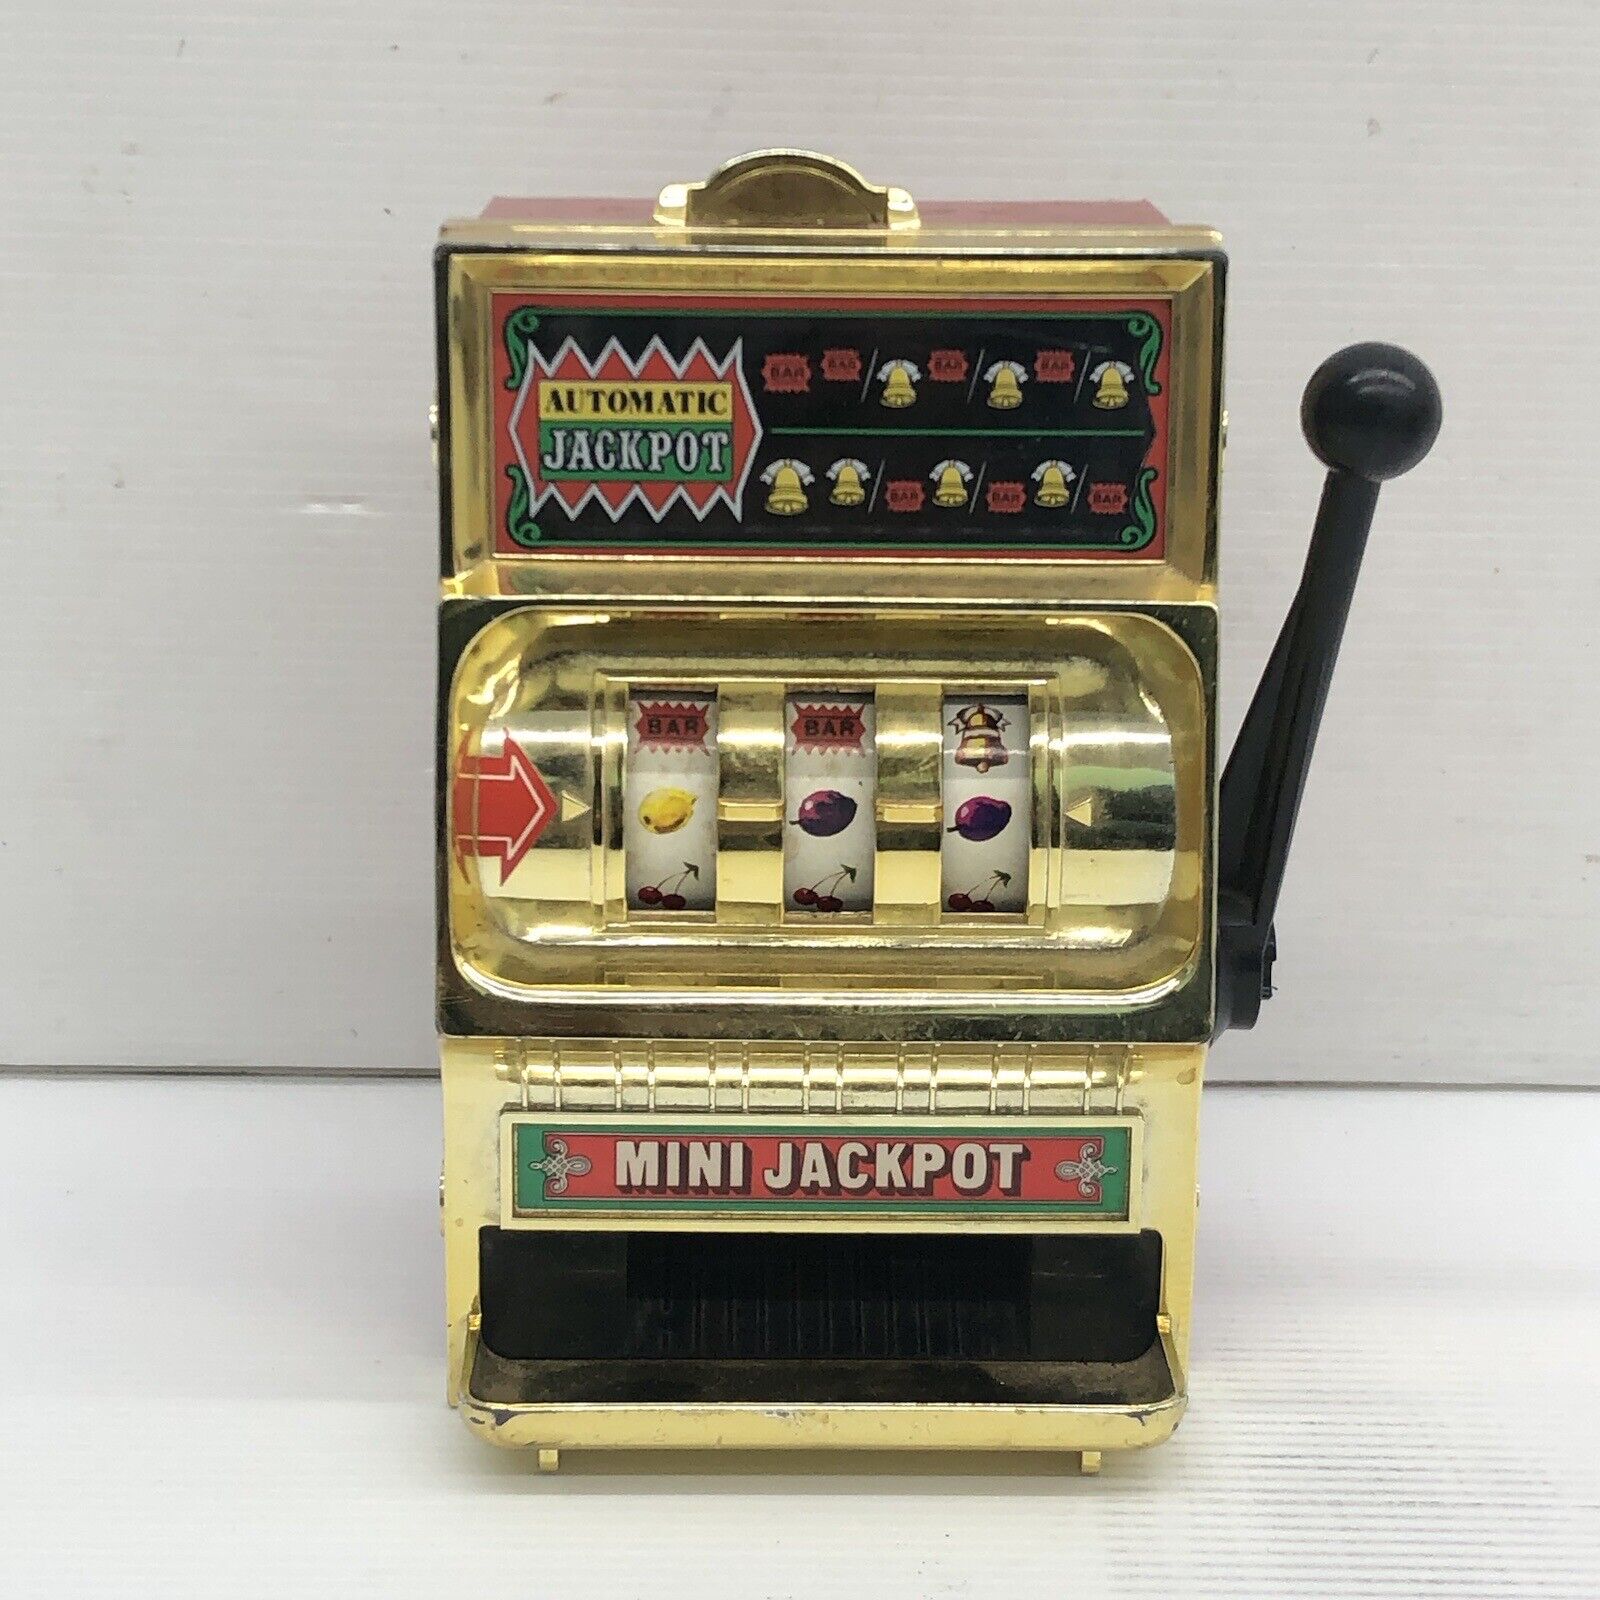 VTG Waco Golden Jackpot Mini Slot Machine Mechanical Toy Made in Japan AS IS